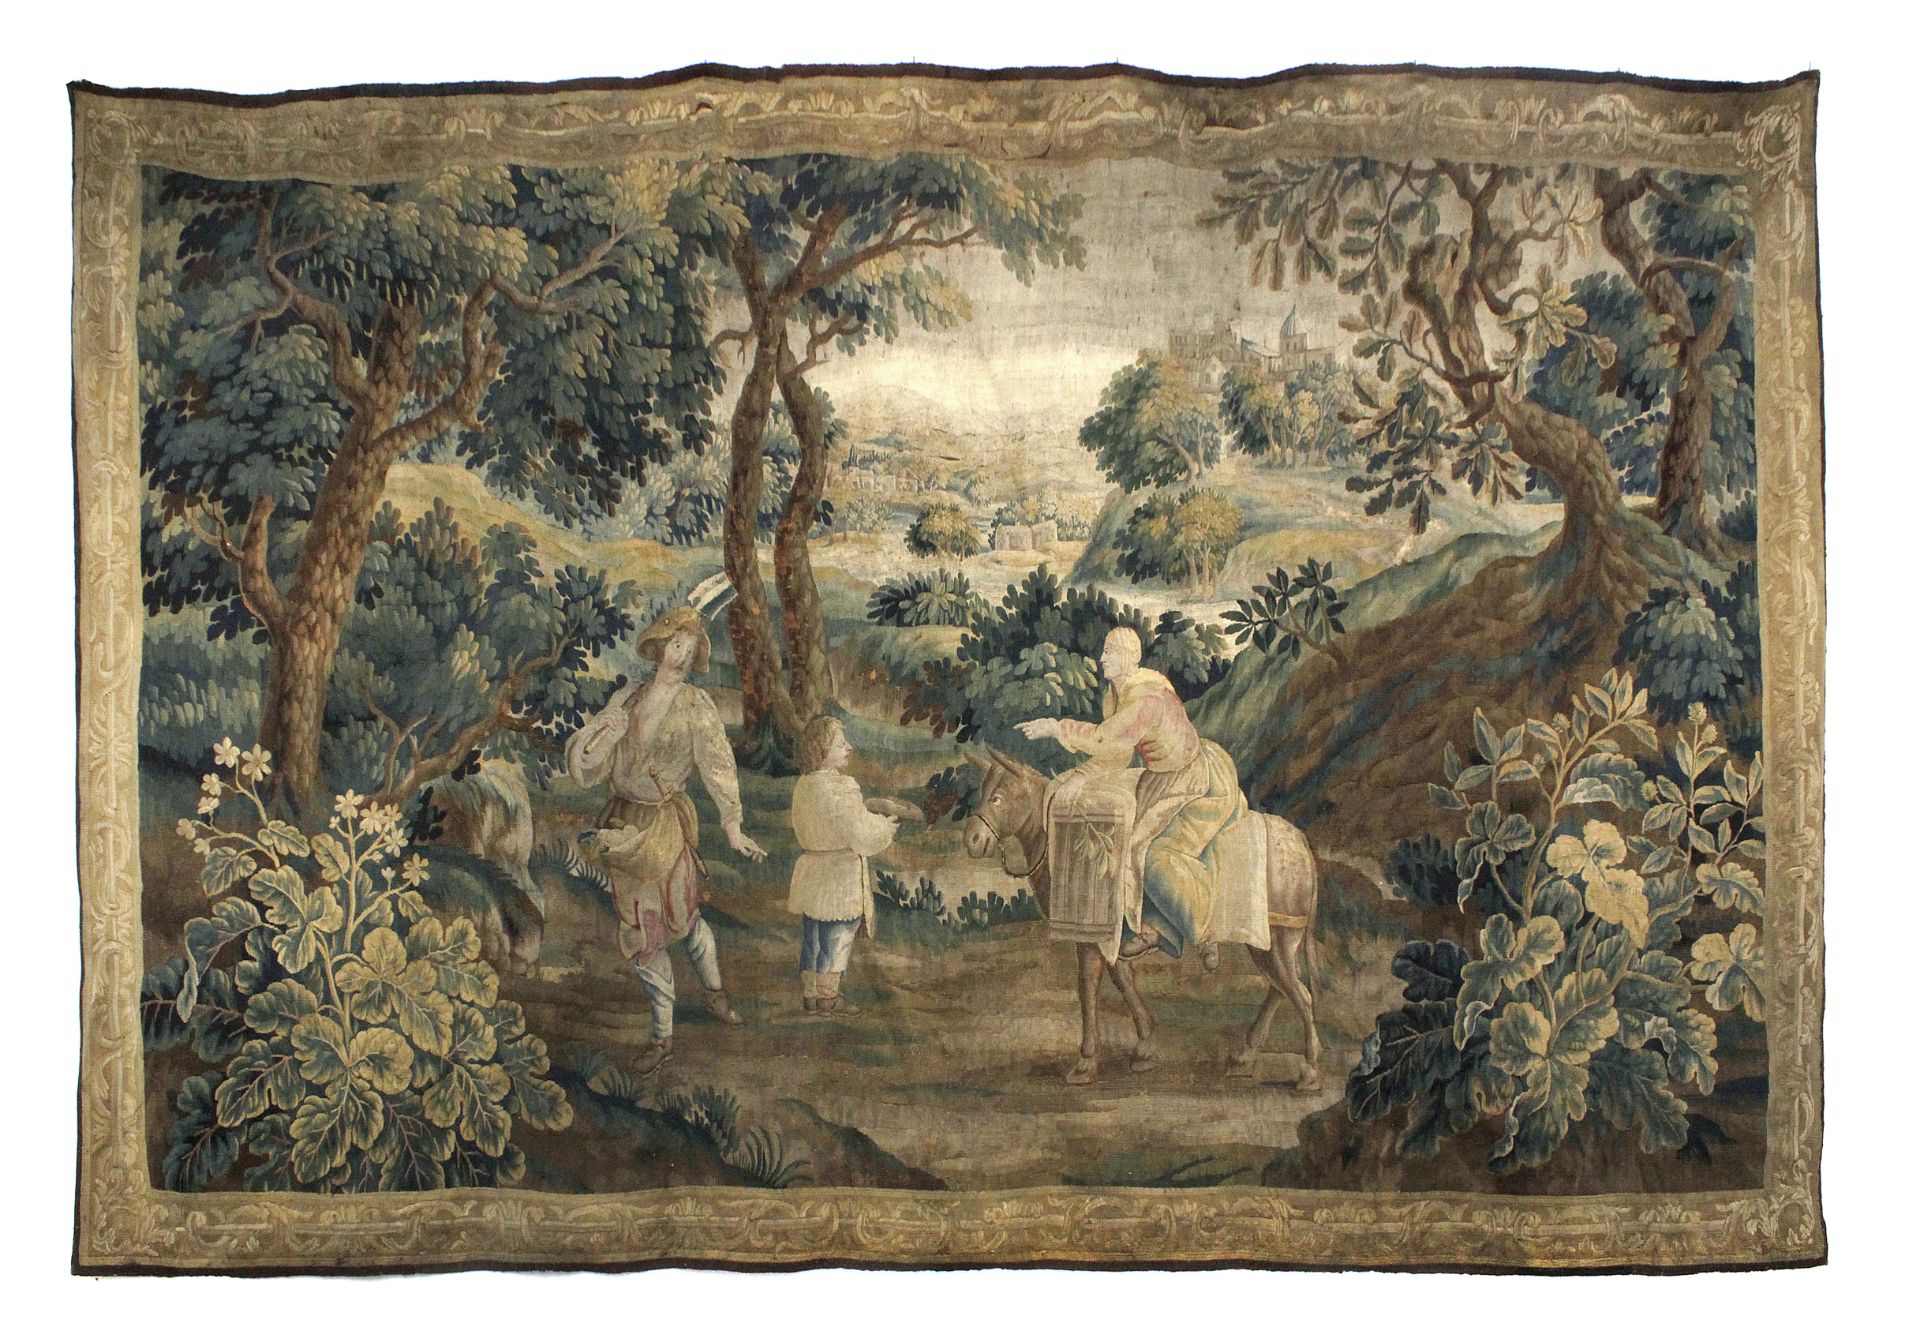 An 18th century French "verdure" tapestry from Aubusson Royal manufacture